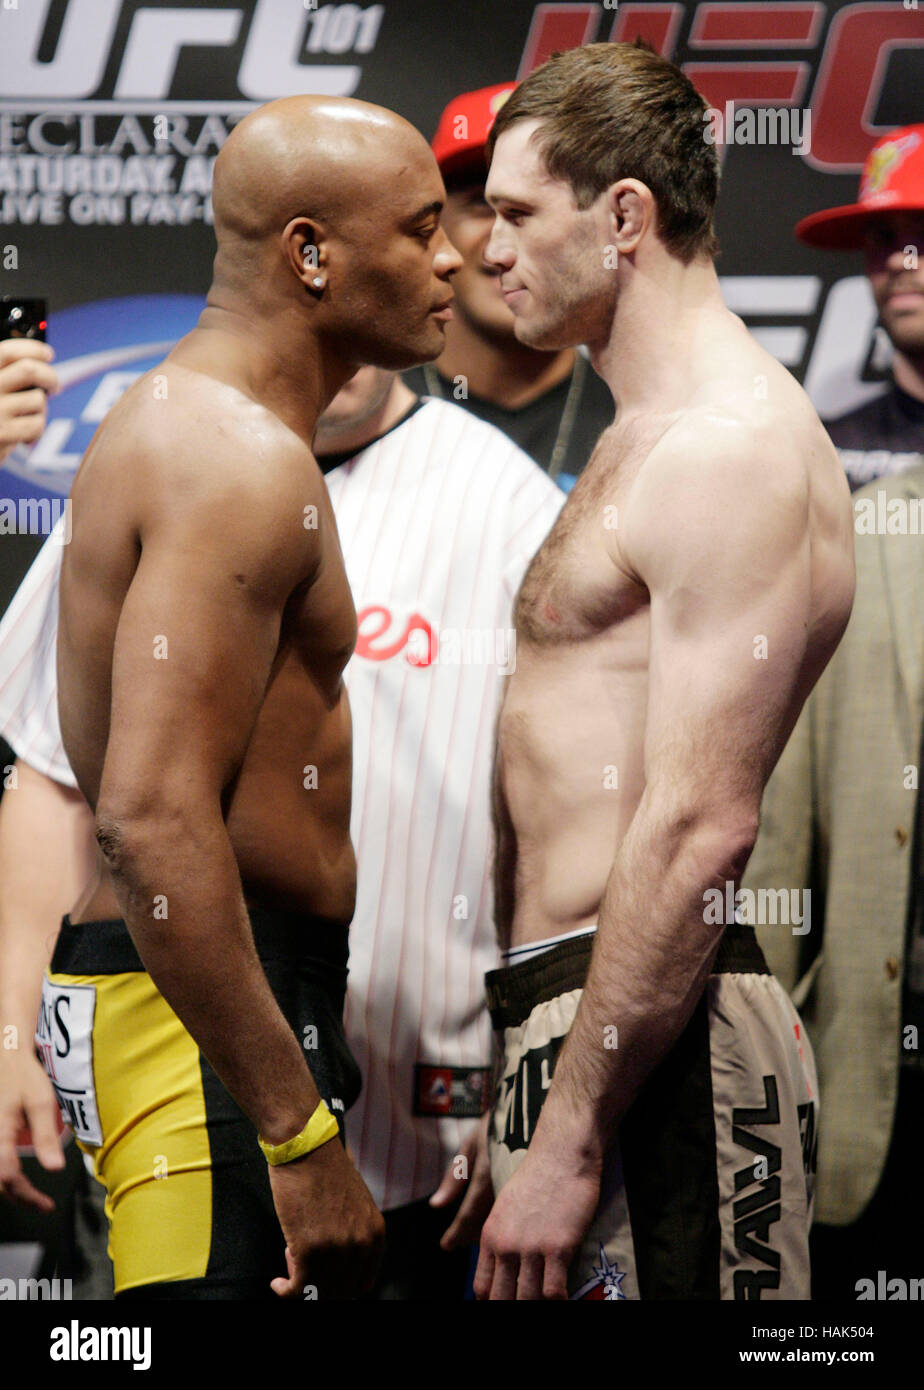 anderson-silva-left-and-forrest-griffin-face-off-during-the-ufc-101-HAK504.jpg